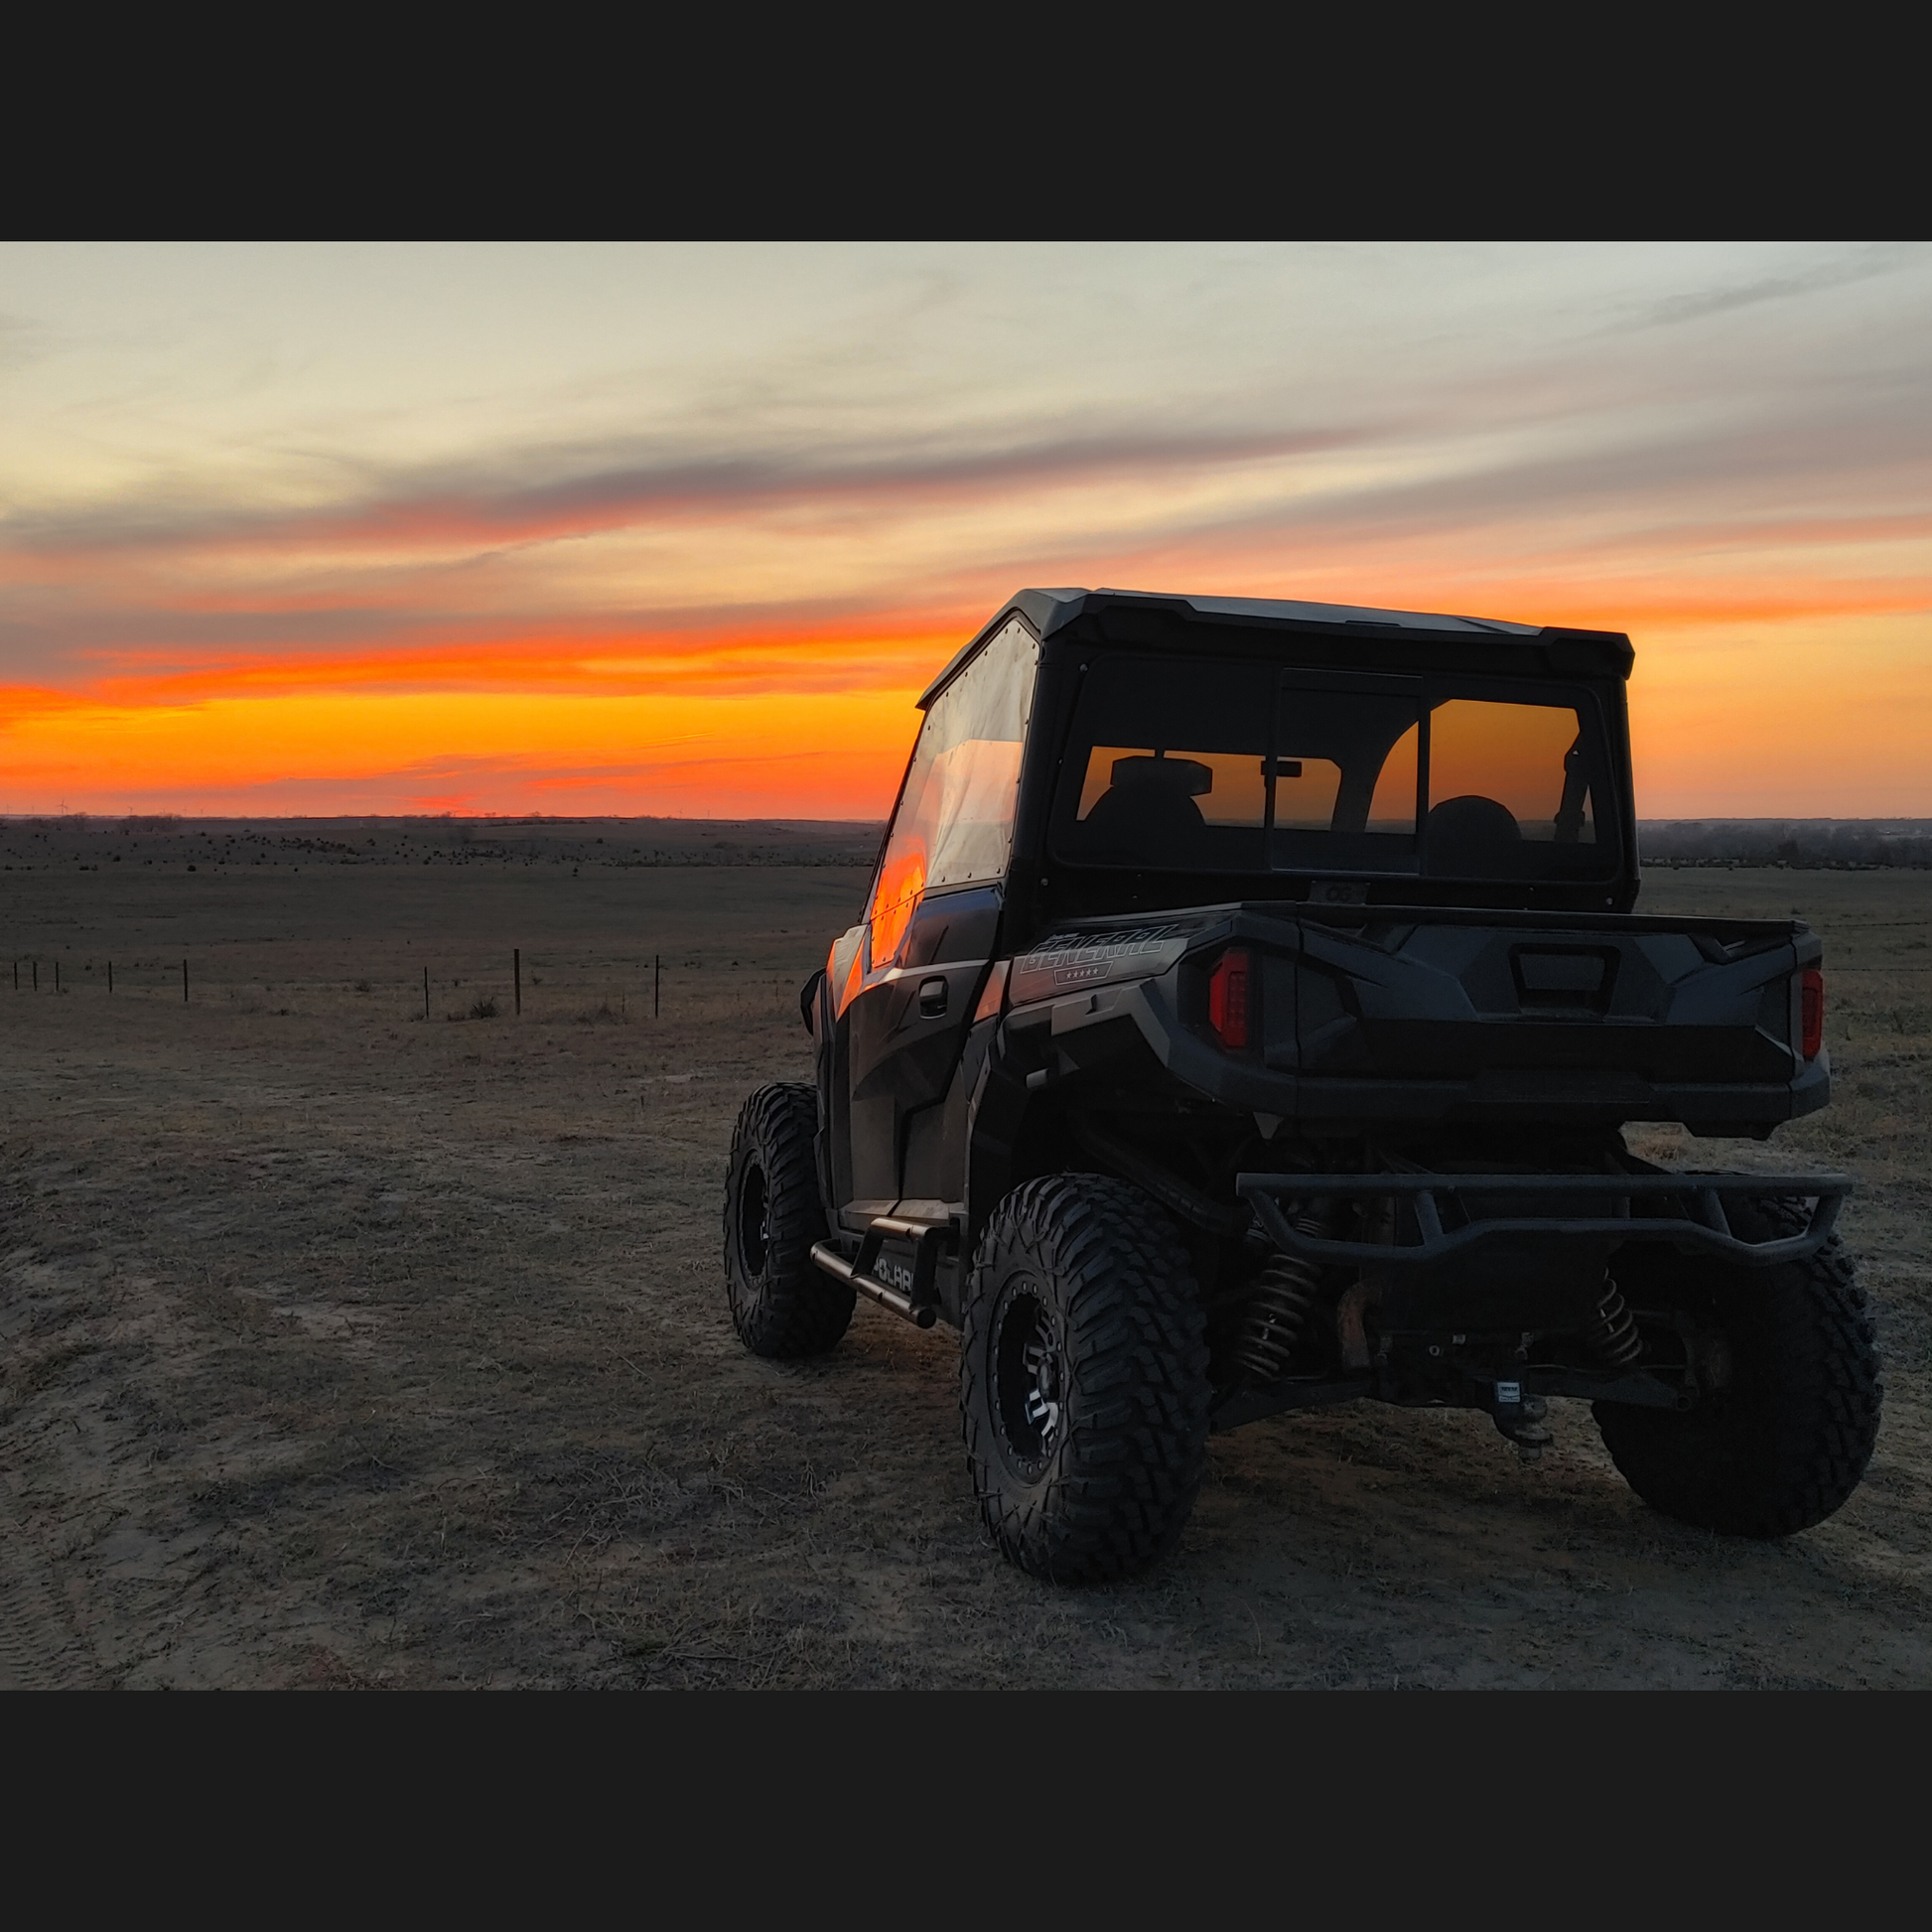 A beautiful sunset showcasing the reflective beauty of the Polaris General and the OnlyGenerals SideskinsLITE hard upper doors.